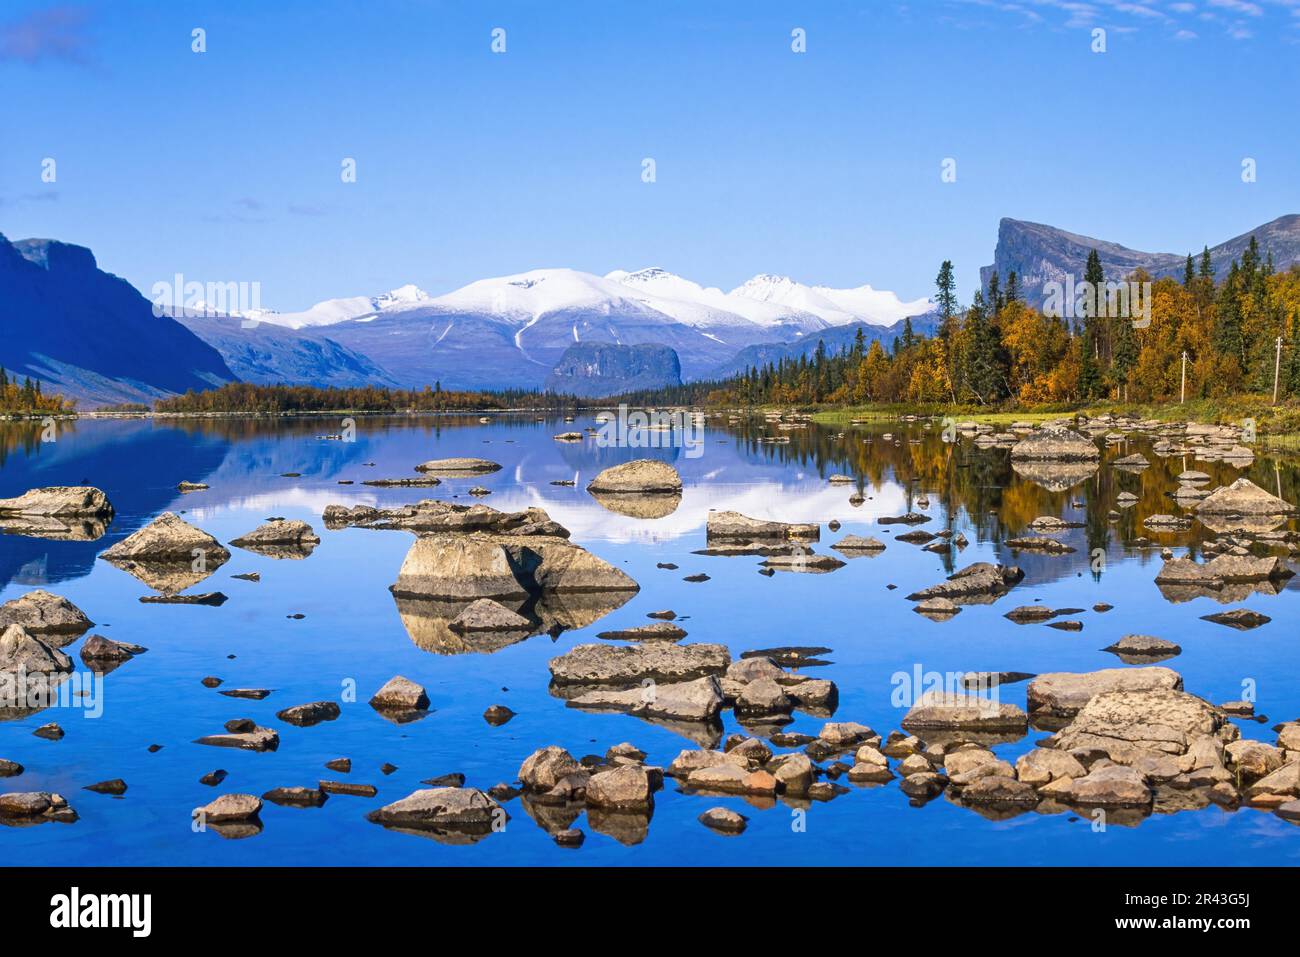 Scenic view at Lake Laitaure in rapa valley at Sareks national park with and snow capped mountains and autumn colors, Kvikkjokk, Lappland, Sweden Stock Photo